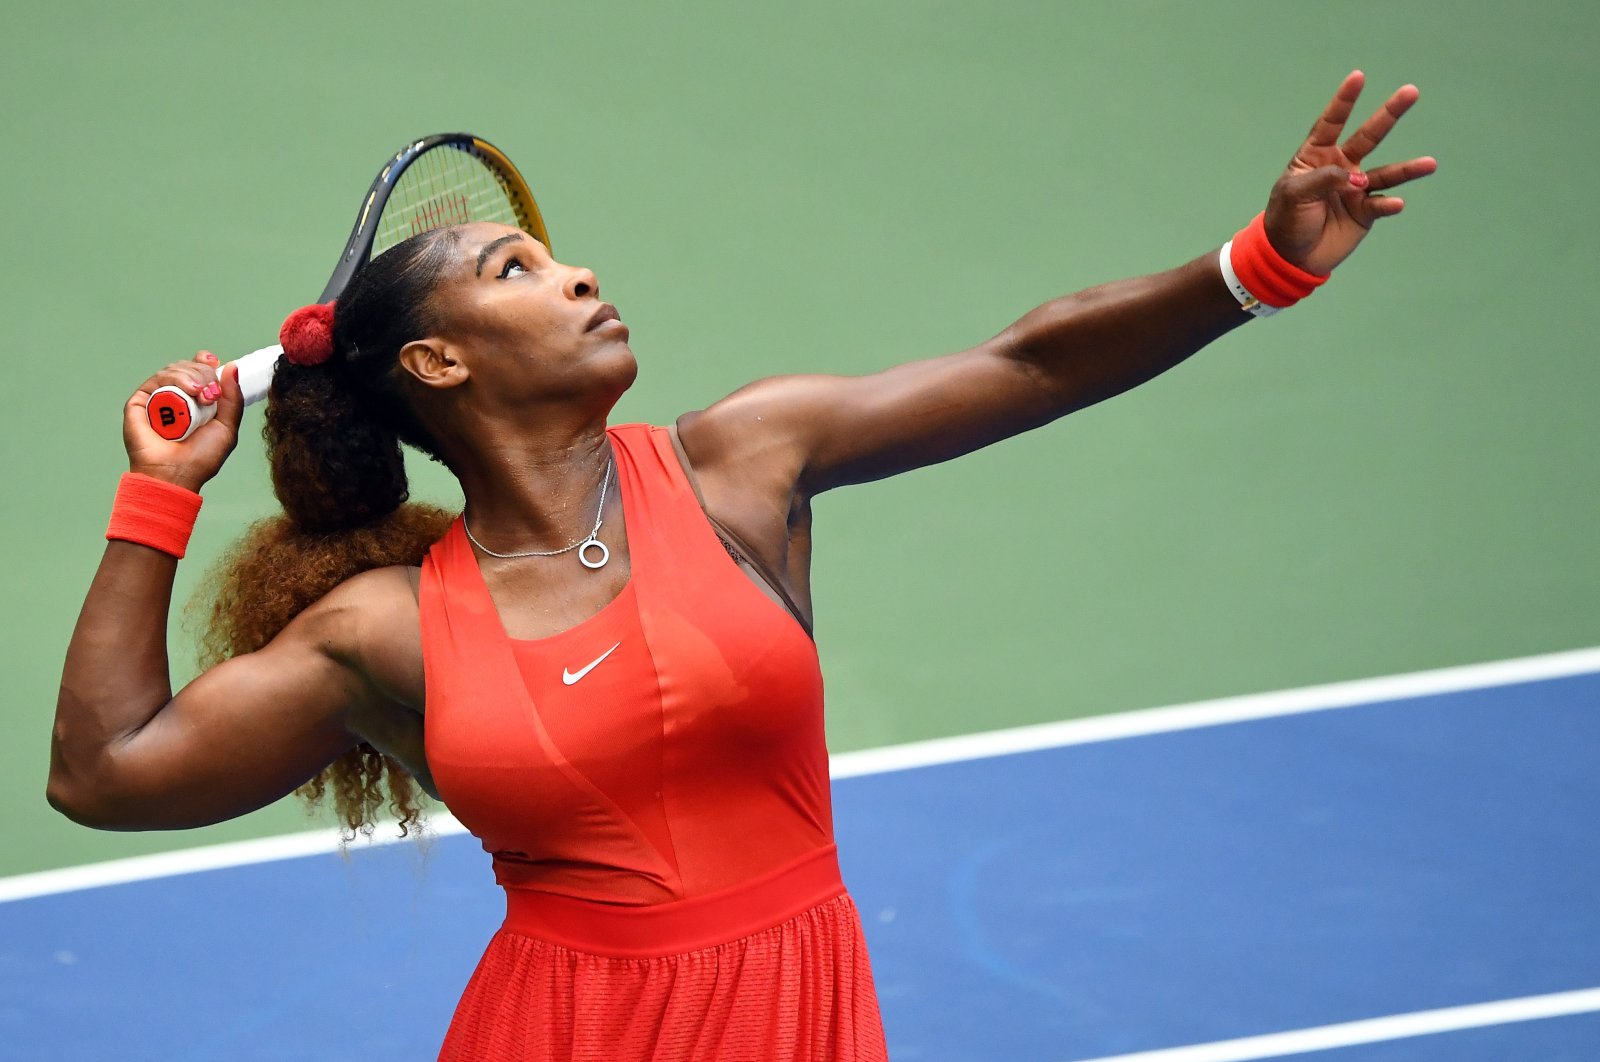 Serena Williams serves the ball against Kristie Ahn during a match in New York City, United States, Sept. 1, 2020. (REUTERS Photo)